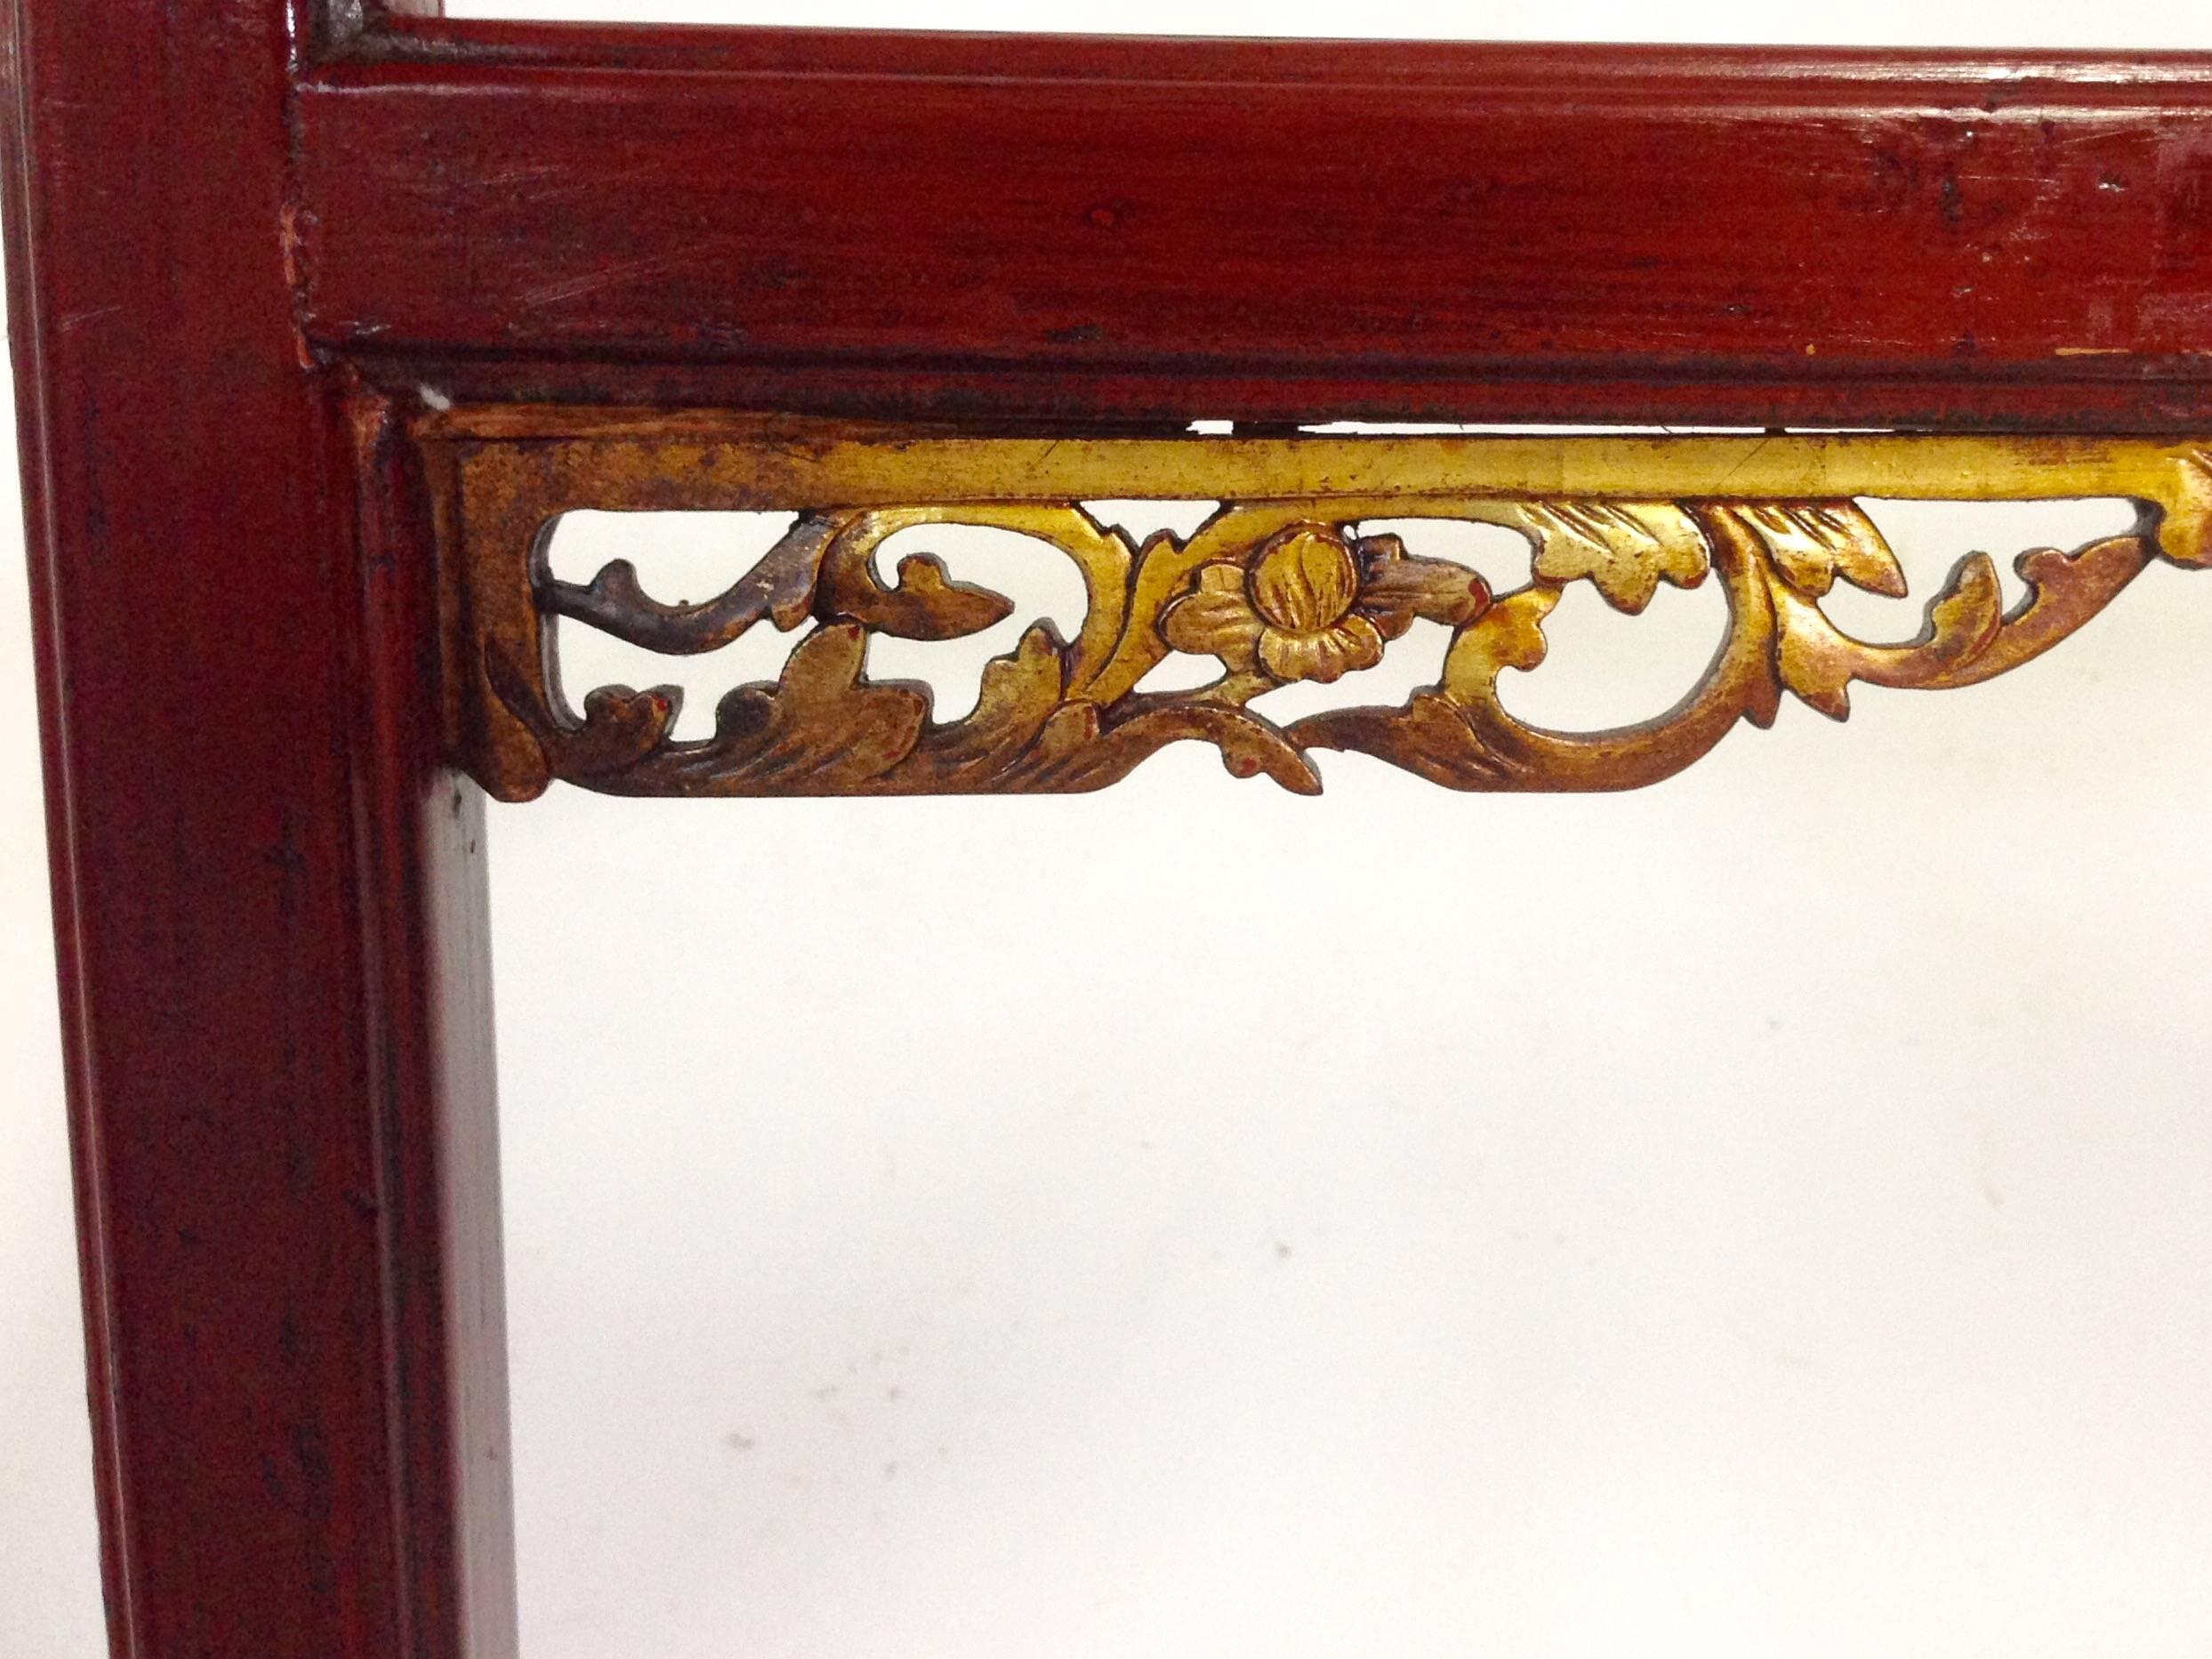 This oversized, double-sided Chinese antique dragon garment rack is hand-carved, lacquered, and features gold-gilt dragons decorainge the end corners - indicating the master's high social ranking. Interesting fretwork and a high gloss finish make